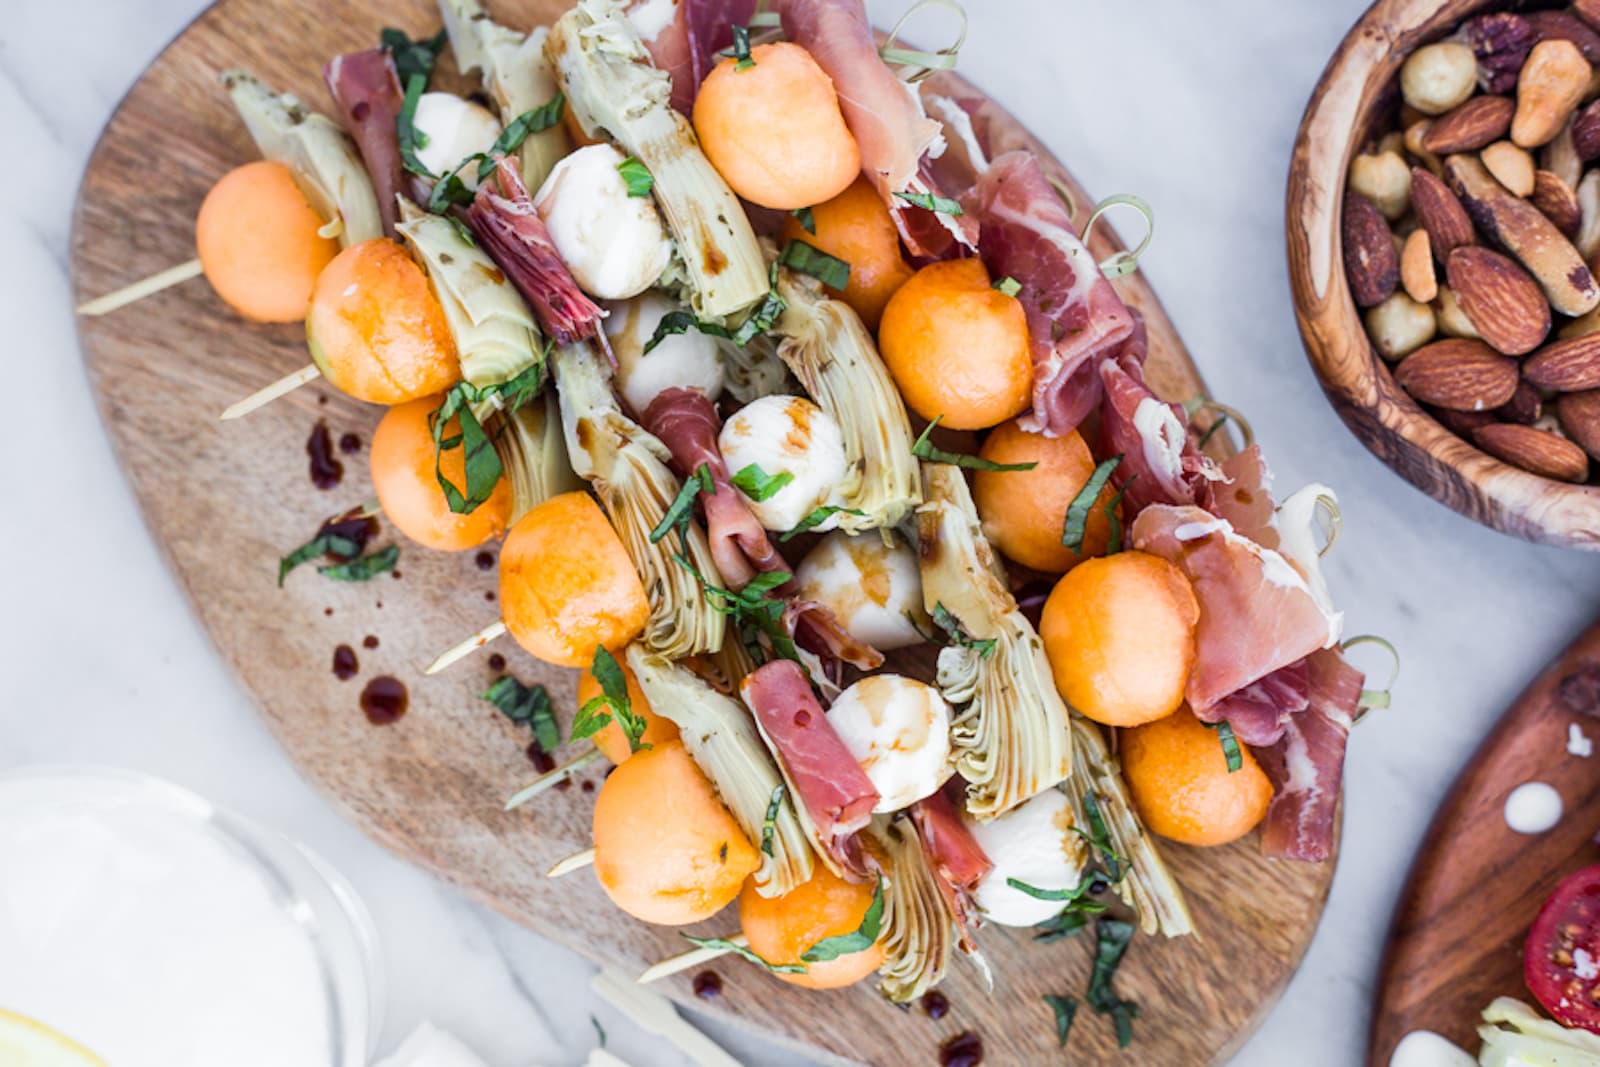 Skewers with melon, prosciutto, and marinated artichoke hearts on a wooden platter